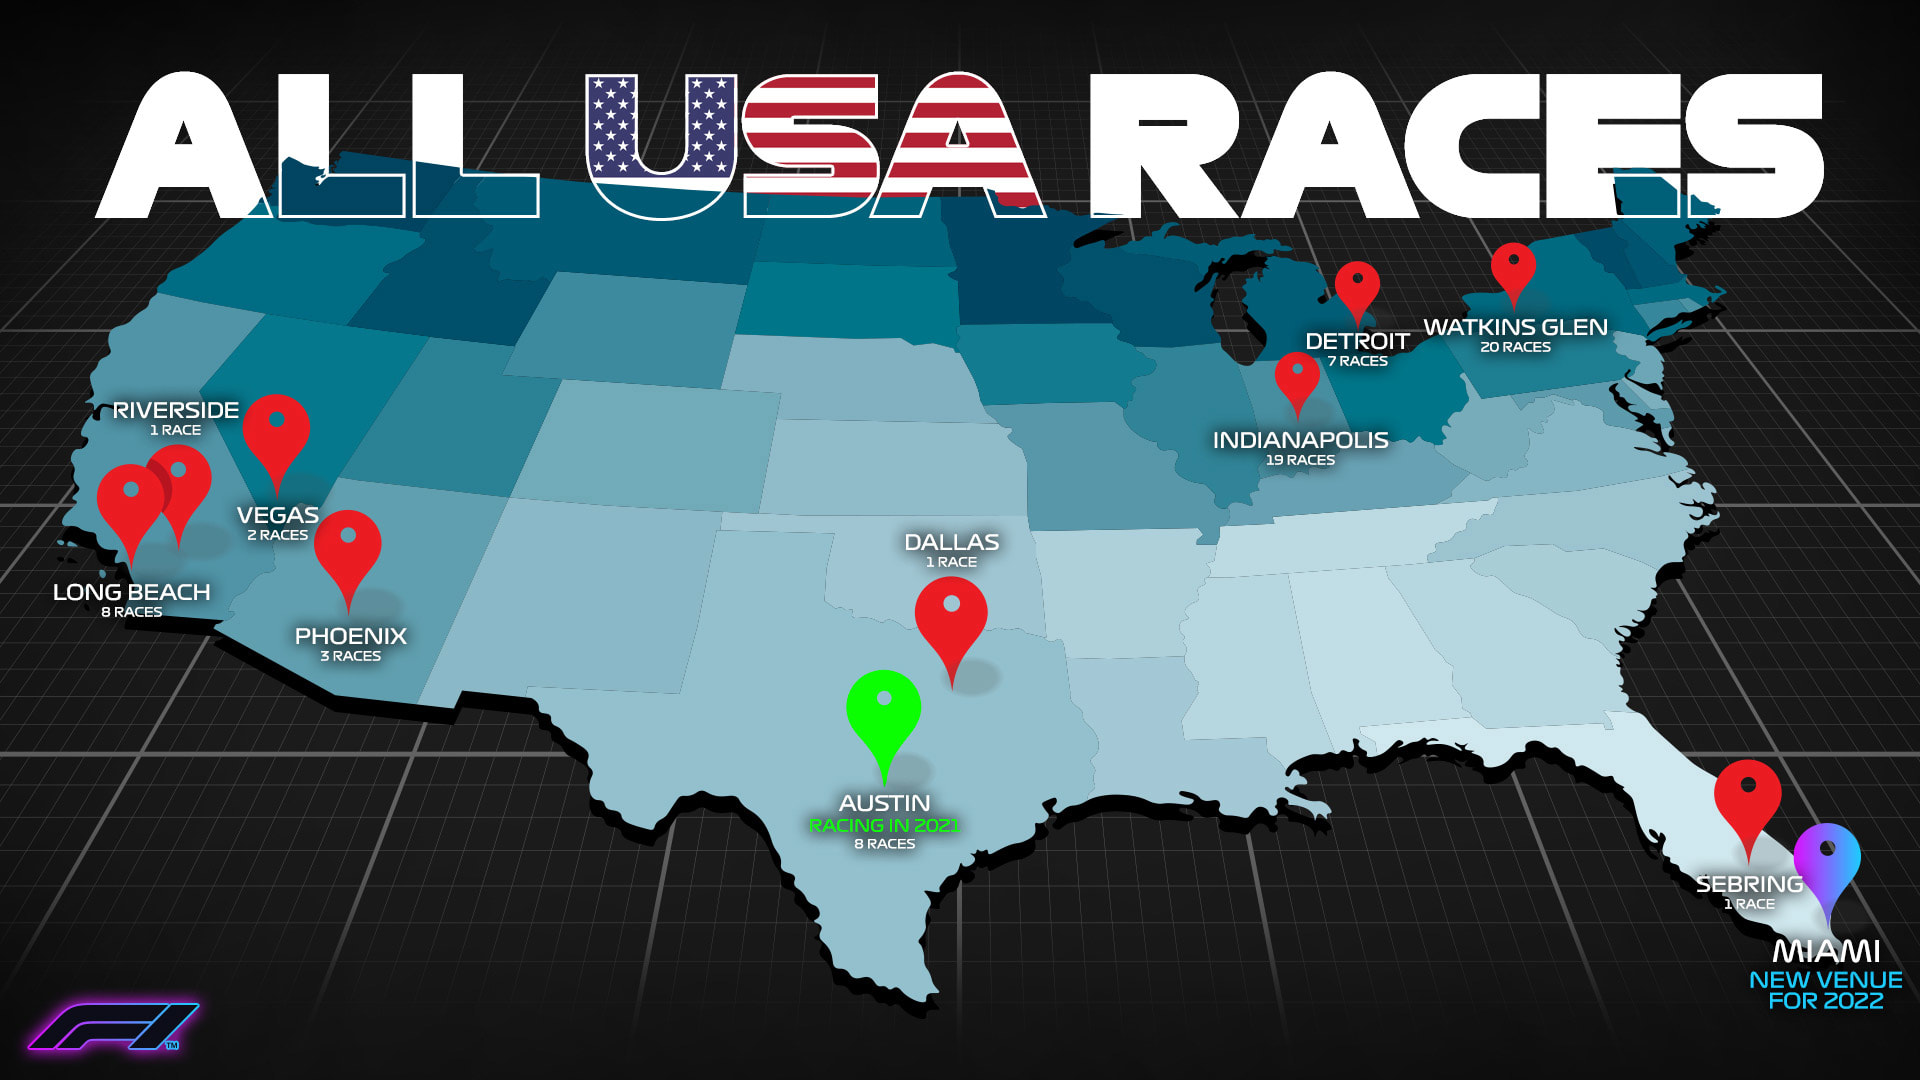 Miami is coming but where else has F1 raced in the USA? Formula 1®